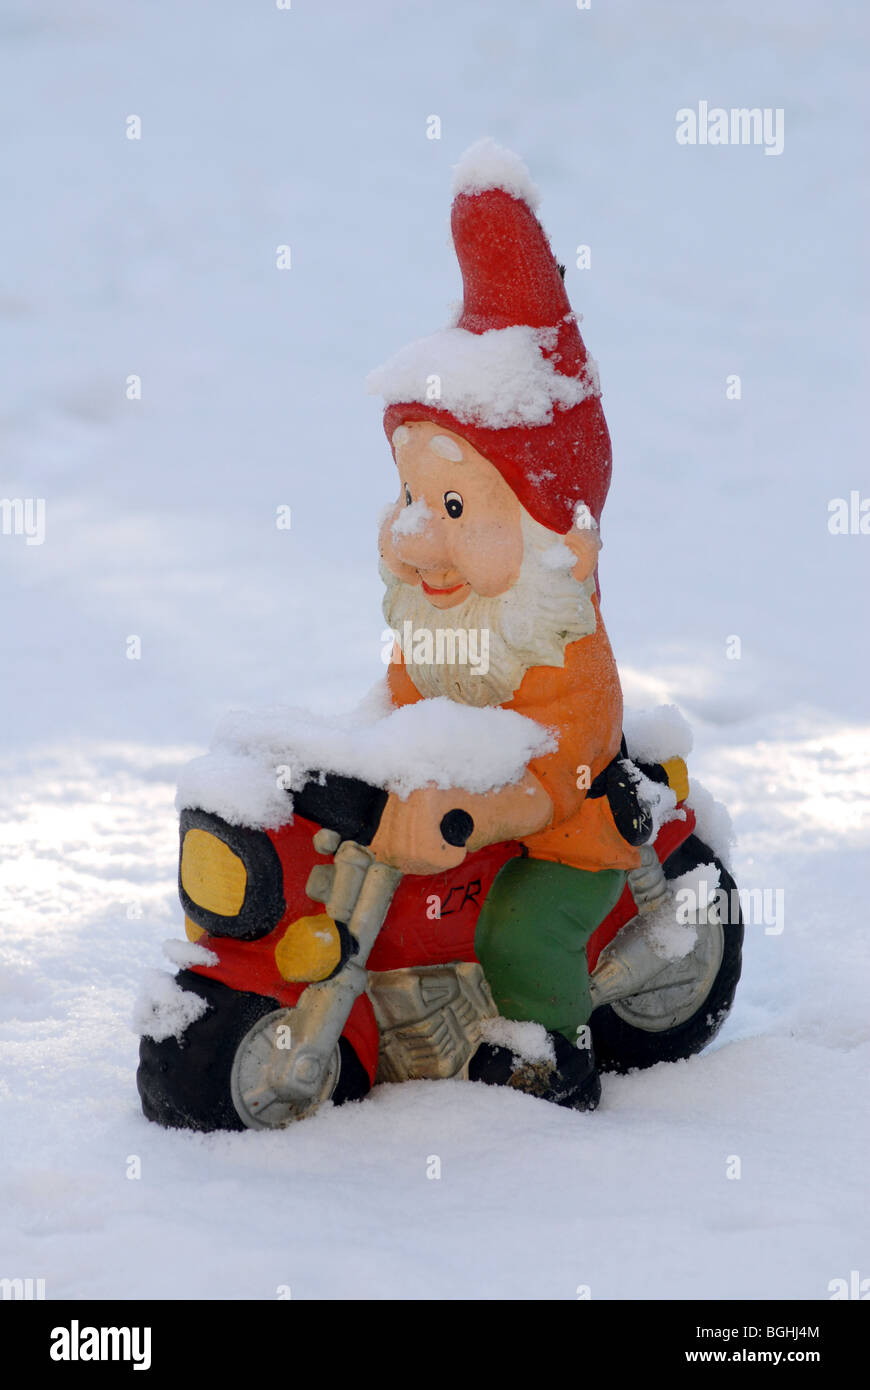 GNOME SITTING ON MOTORBIKE IN SNOWY CONDITIONS,UK Stock Photo